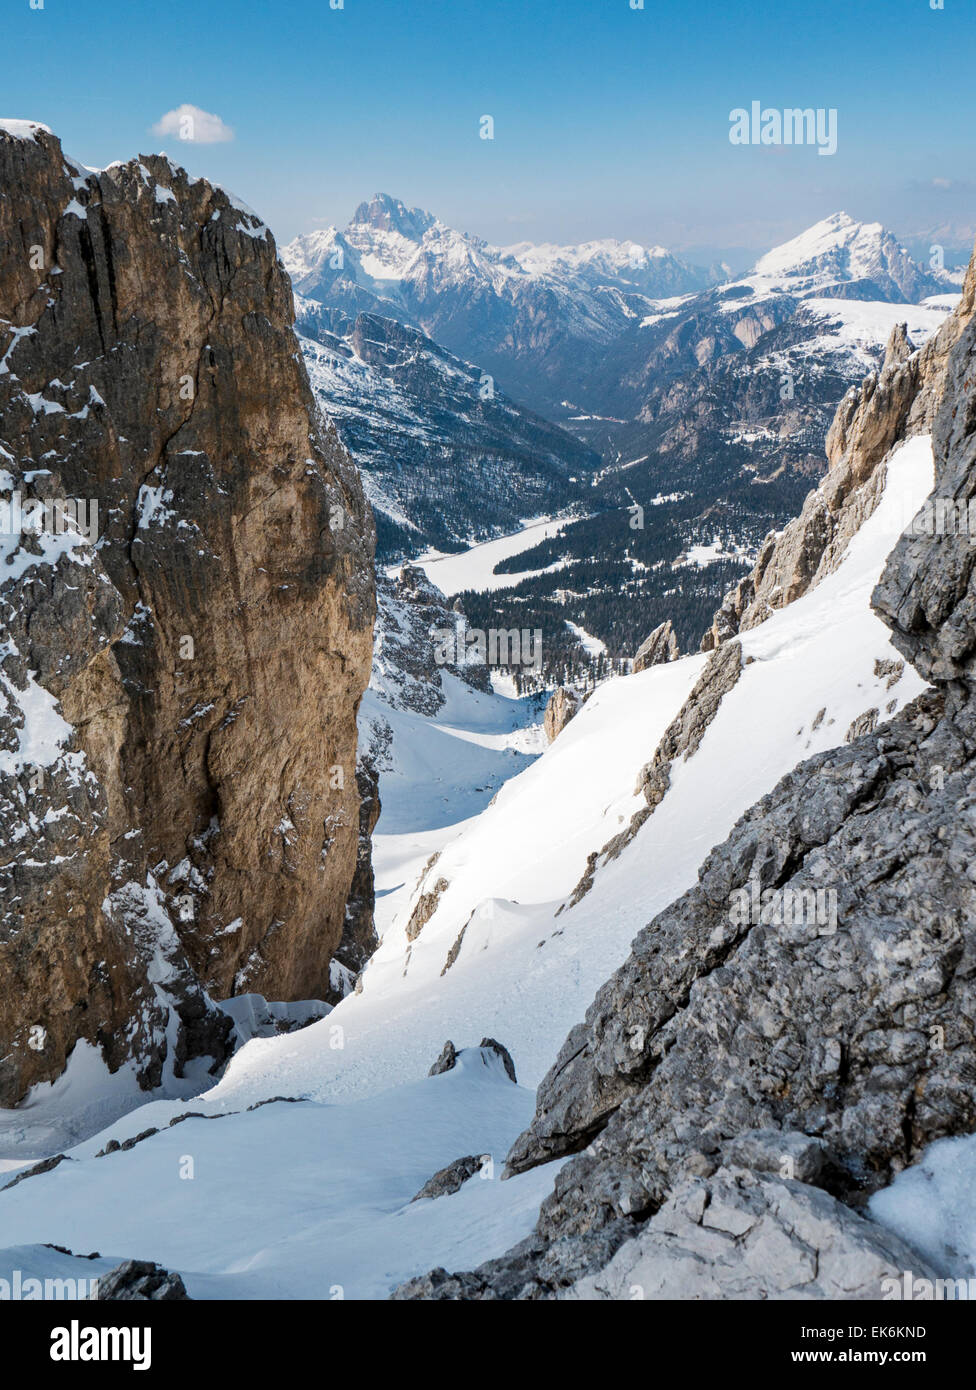 Alpine winter view of Dolomite Mountains, northeast of Cortina, Italy Stock Photo